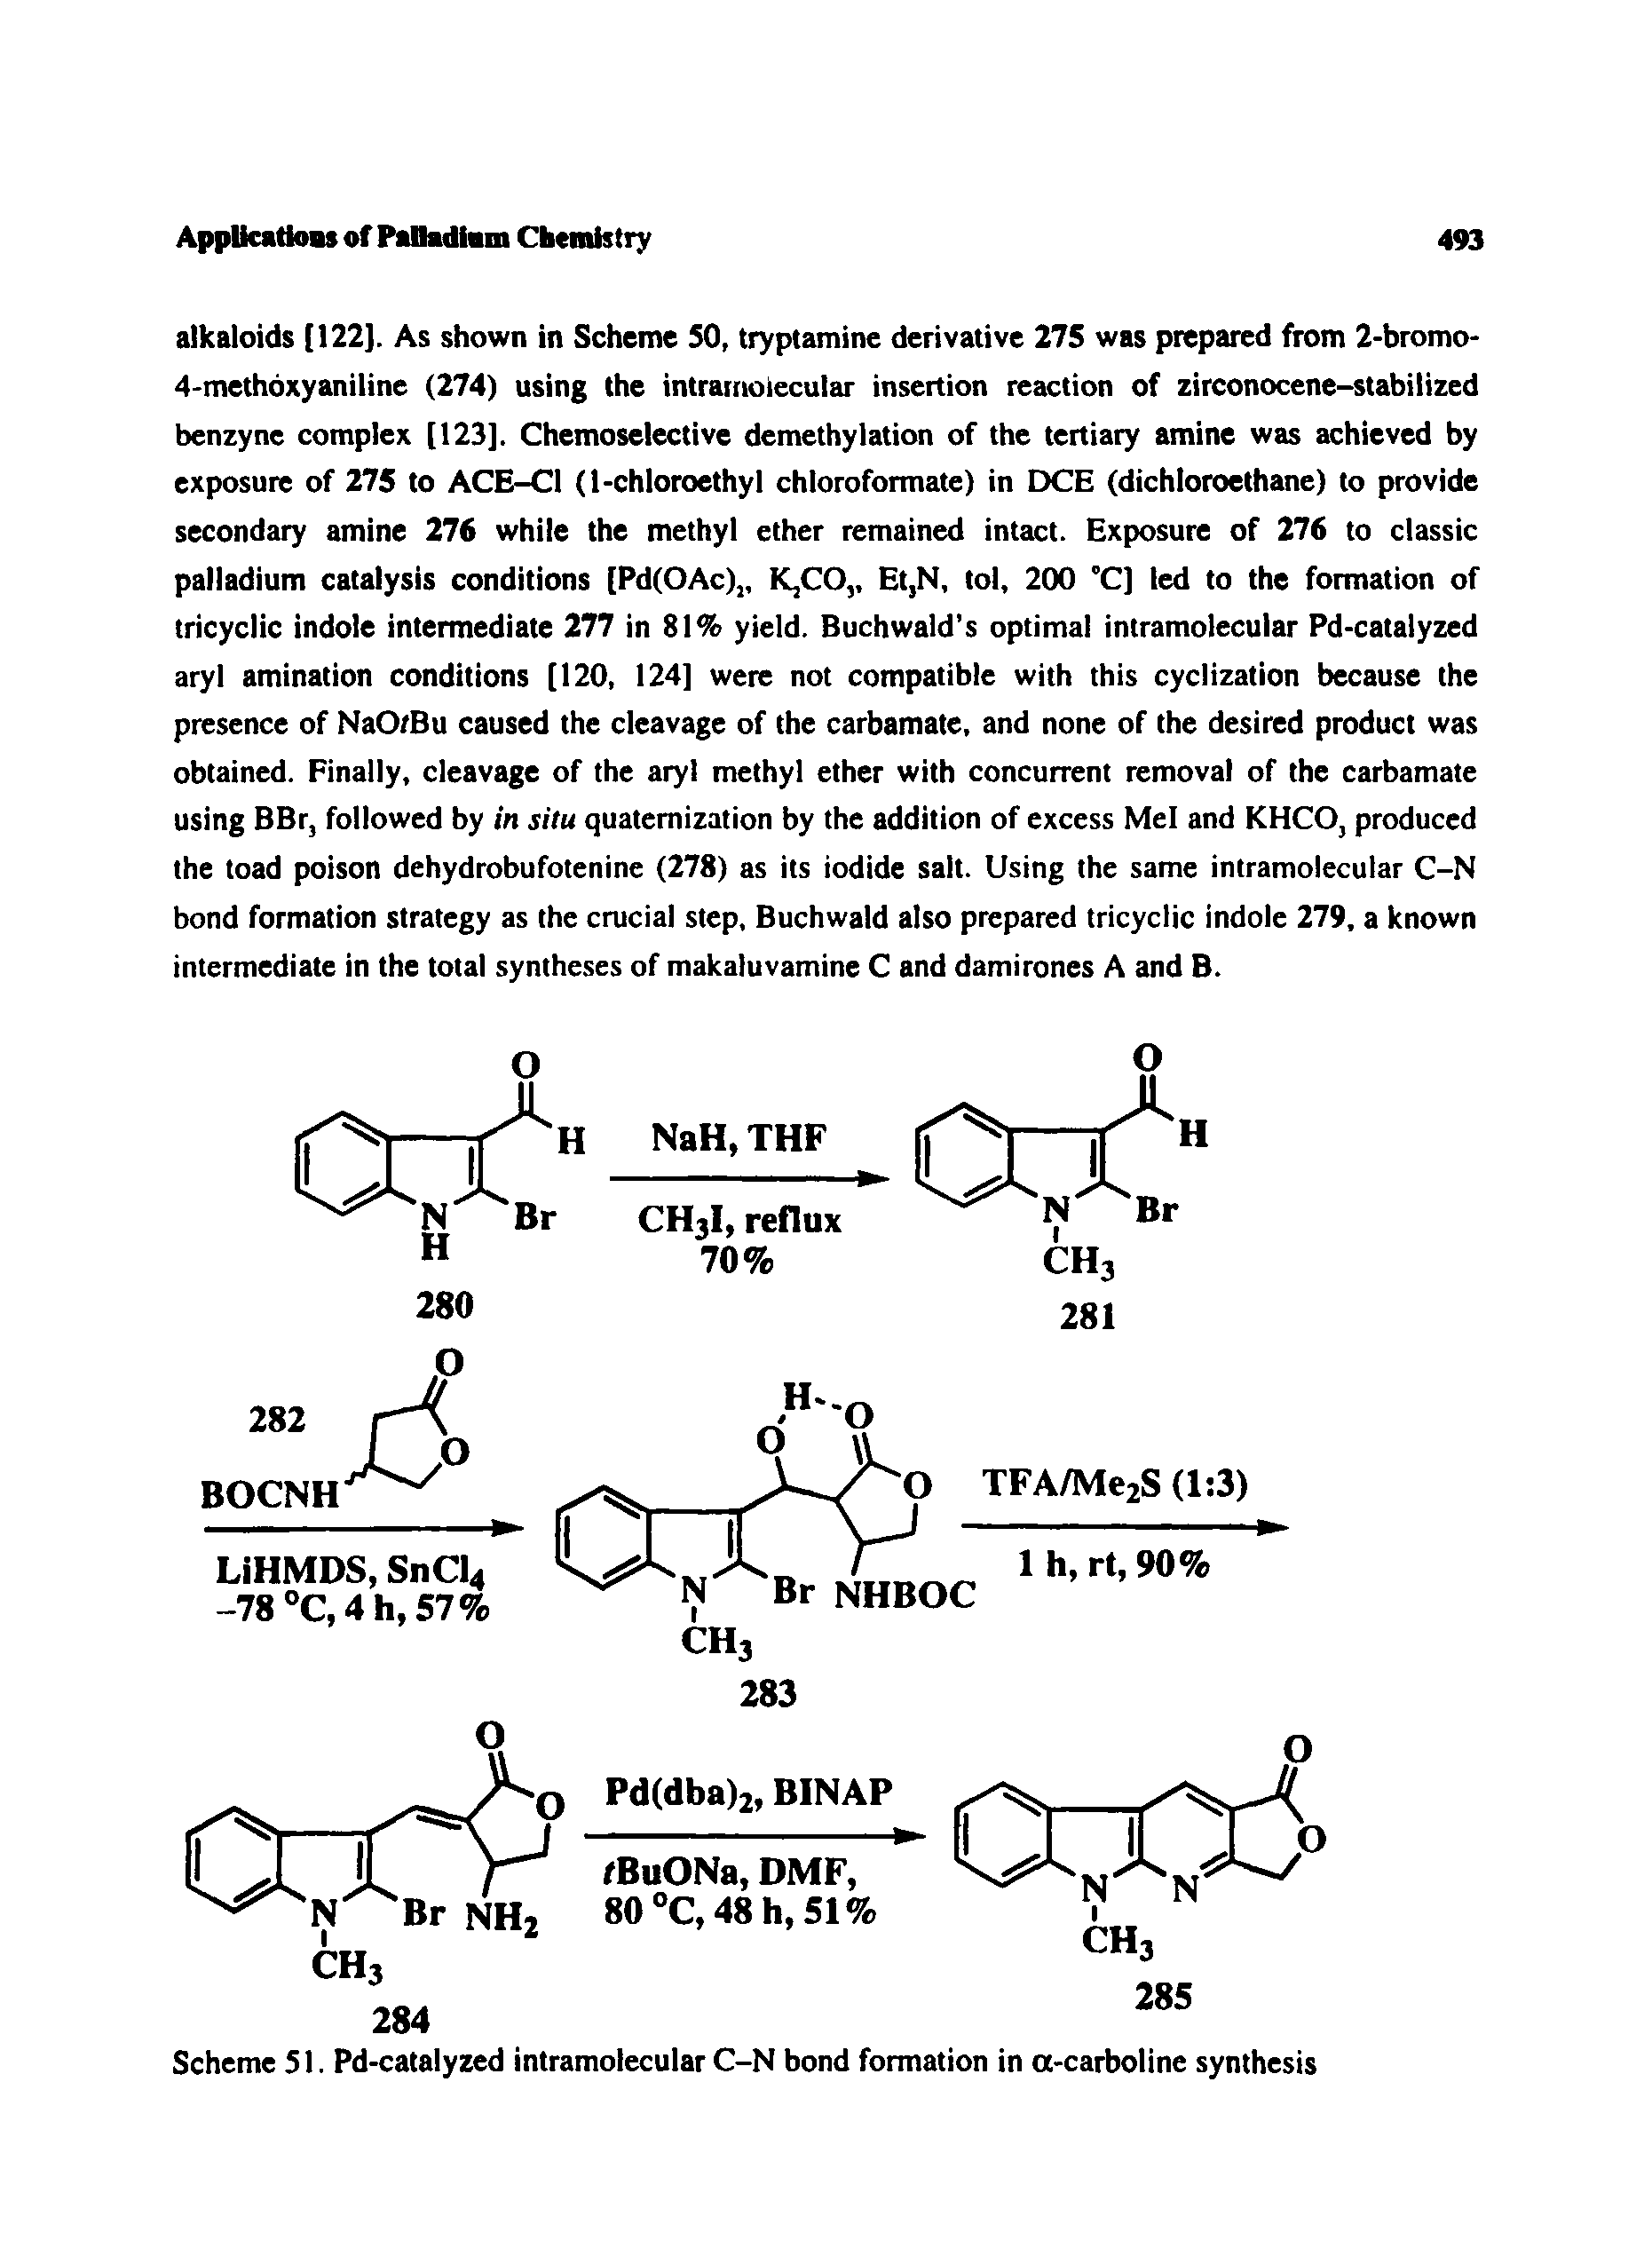 Scheme 51. Pd-catalyzed intramolecular C-N bond formation in a-carboline synthesis...